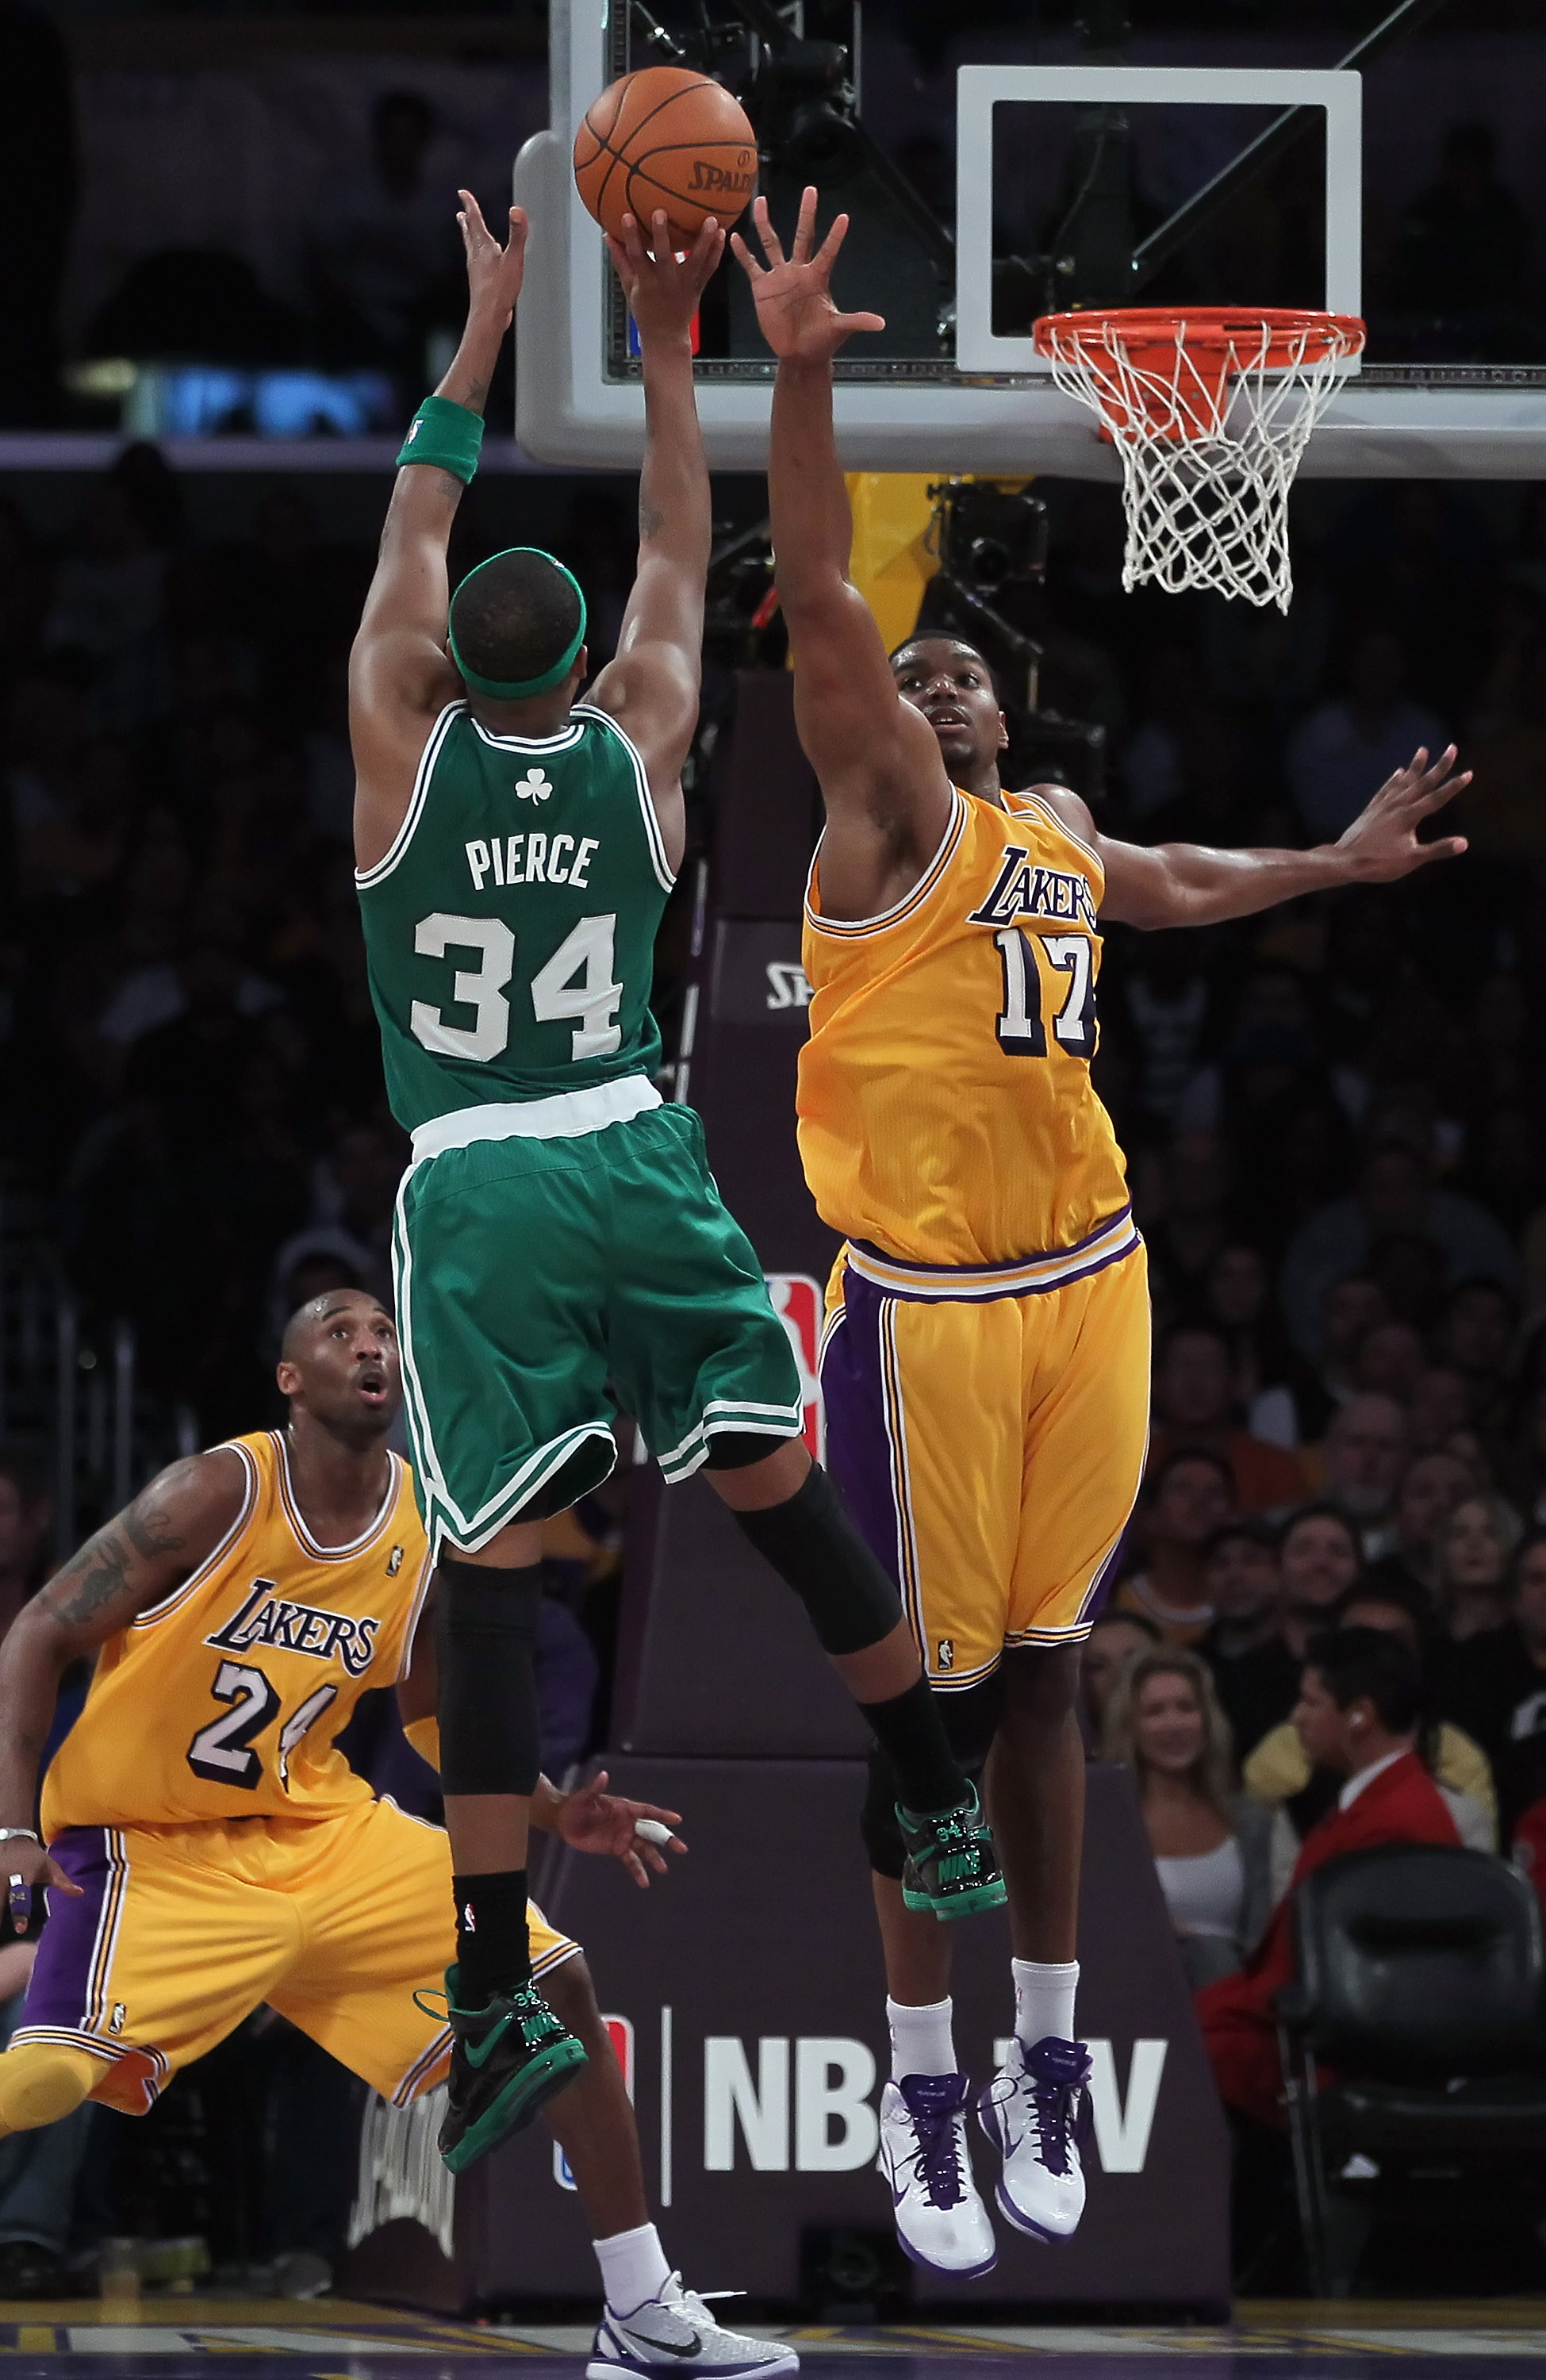 LOS ANGELES, CA - JANUARY 30:  Paul Pierce #34 of the Boston Celtics shoots over Andrew Bynum #17 of the Los Angeles Lakers in the first half at Staples Center on January 30, 2011 in Los Angeles, California. The Celtics defeated the Lakers 109-96.  (Photo